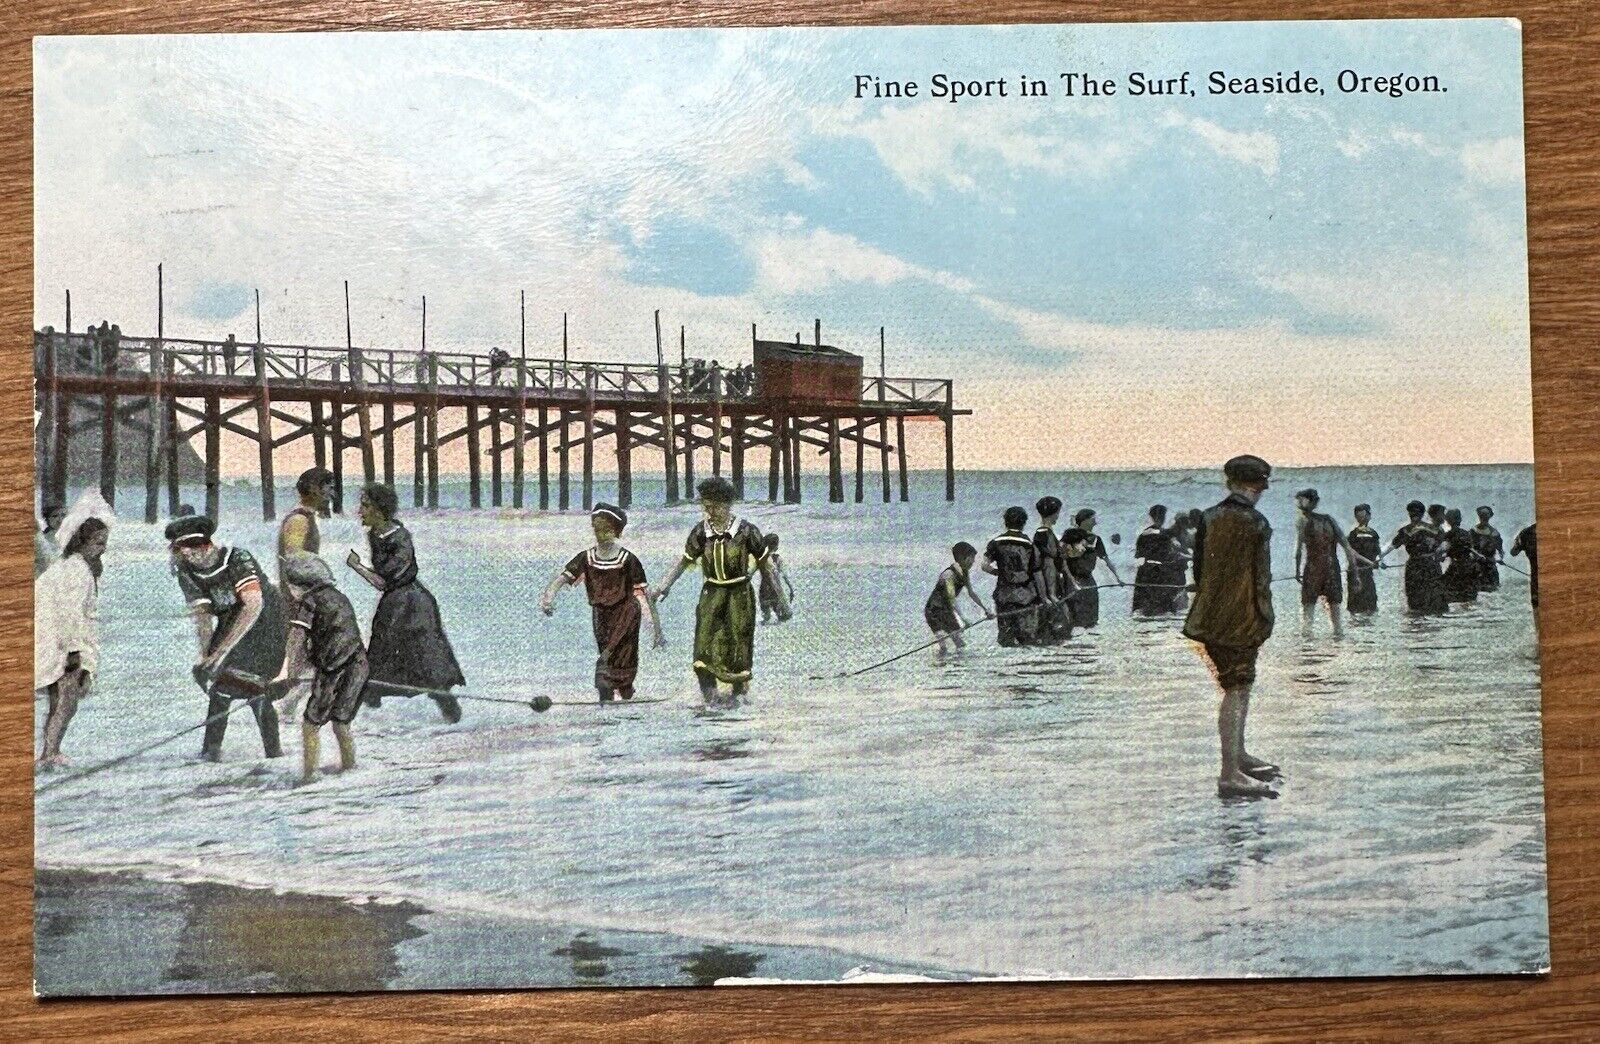 Fine Sport In The Surf Seaside Oregon OR Clatsop County Postcard c. 1919 Posted